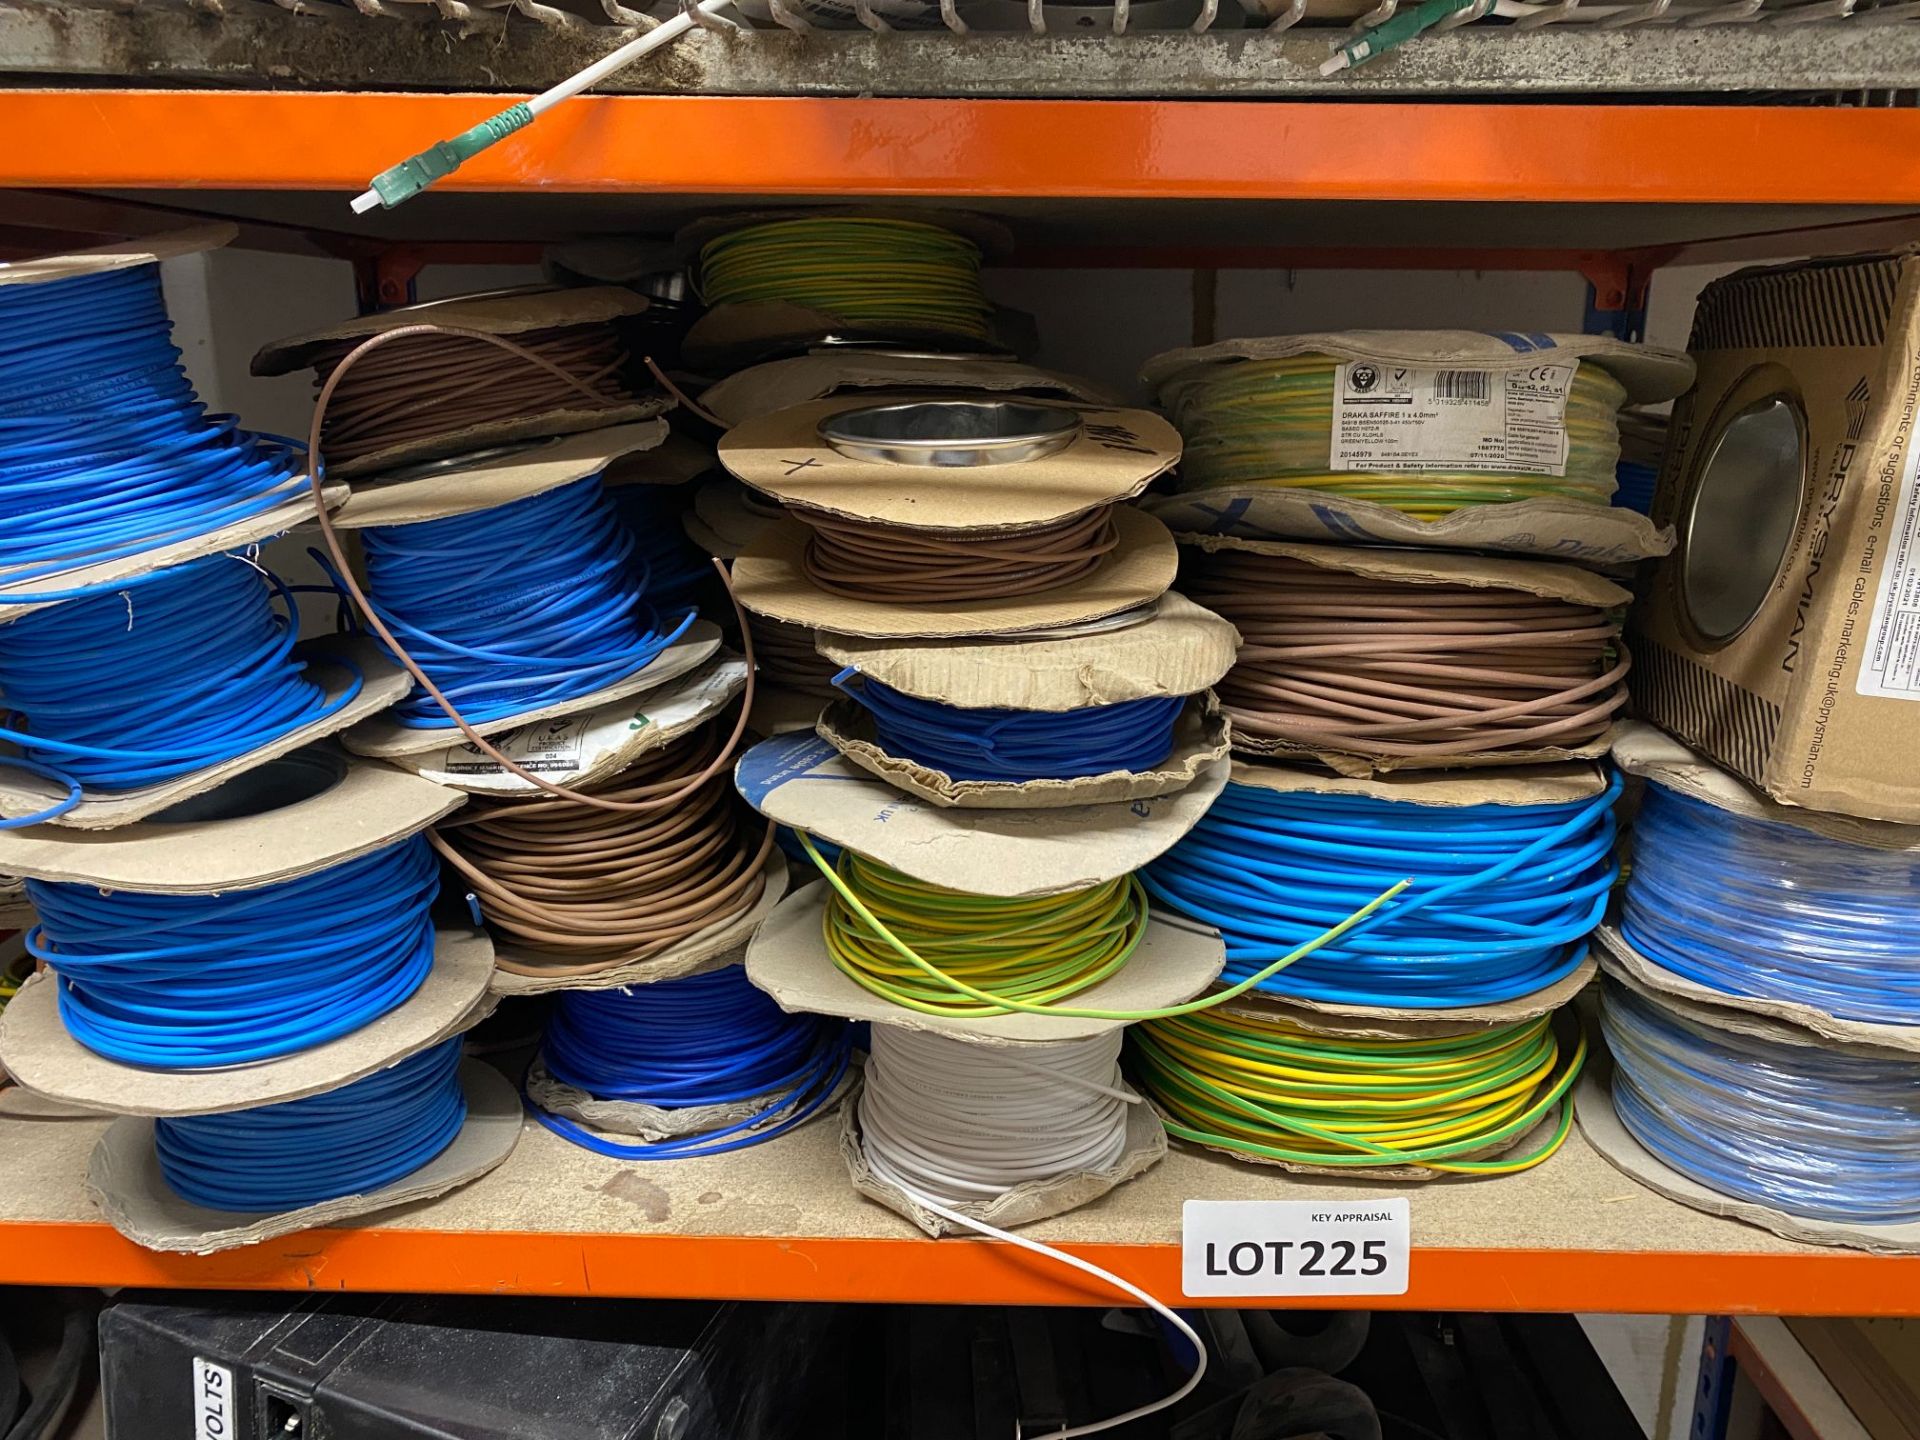 Mixed single core PVC cables from 1.0 to 6.0mm - part & full drums - approx 10 x full & 30 x part,